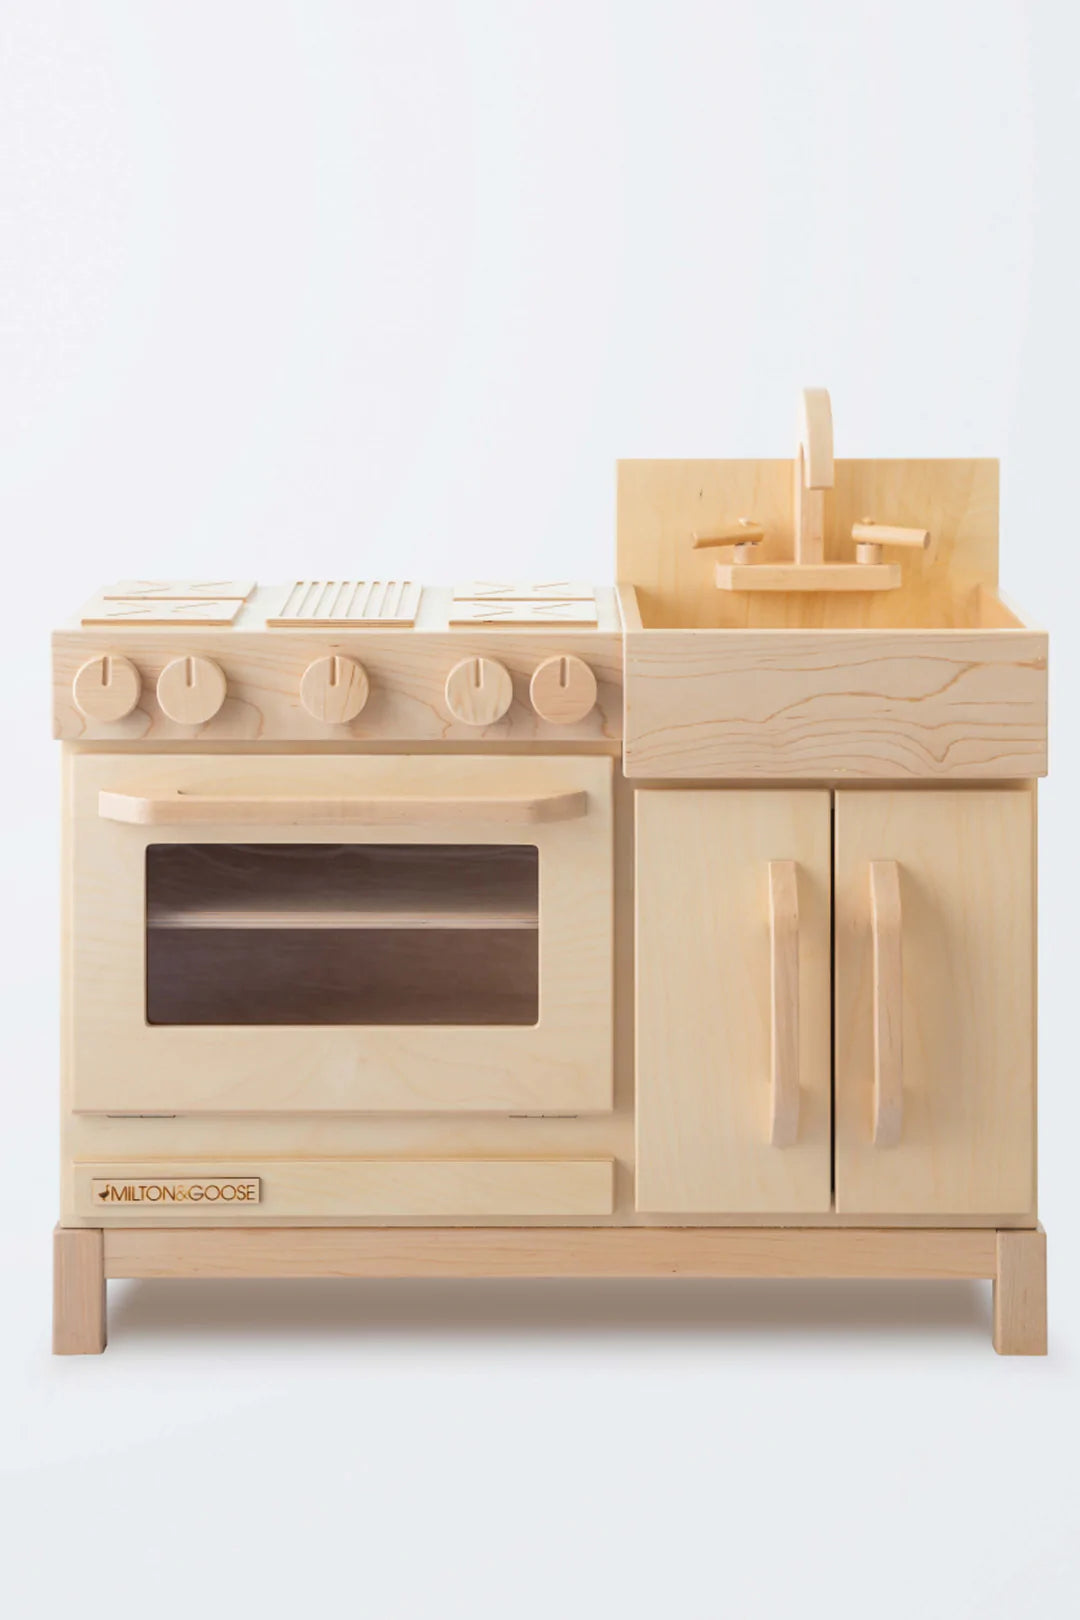 Essential Play Kitchen - Natural